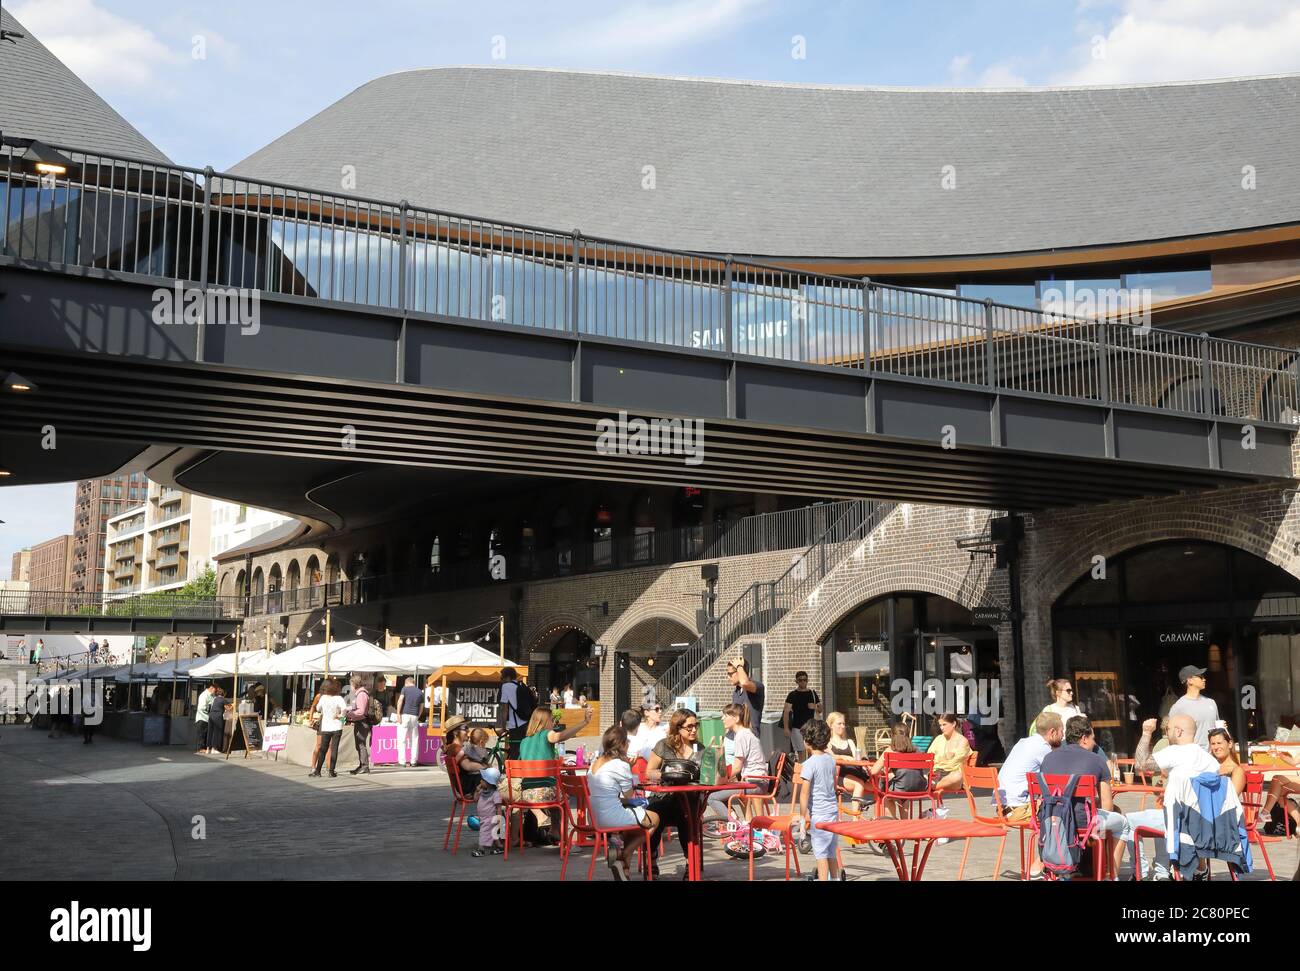 Outdoor seating in the summer sunshine in post corona times at CDY, at Kings Cross, London, UK Stock Photo